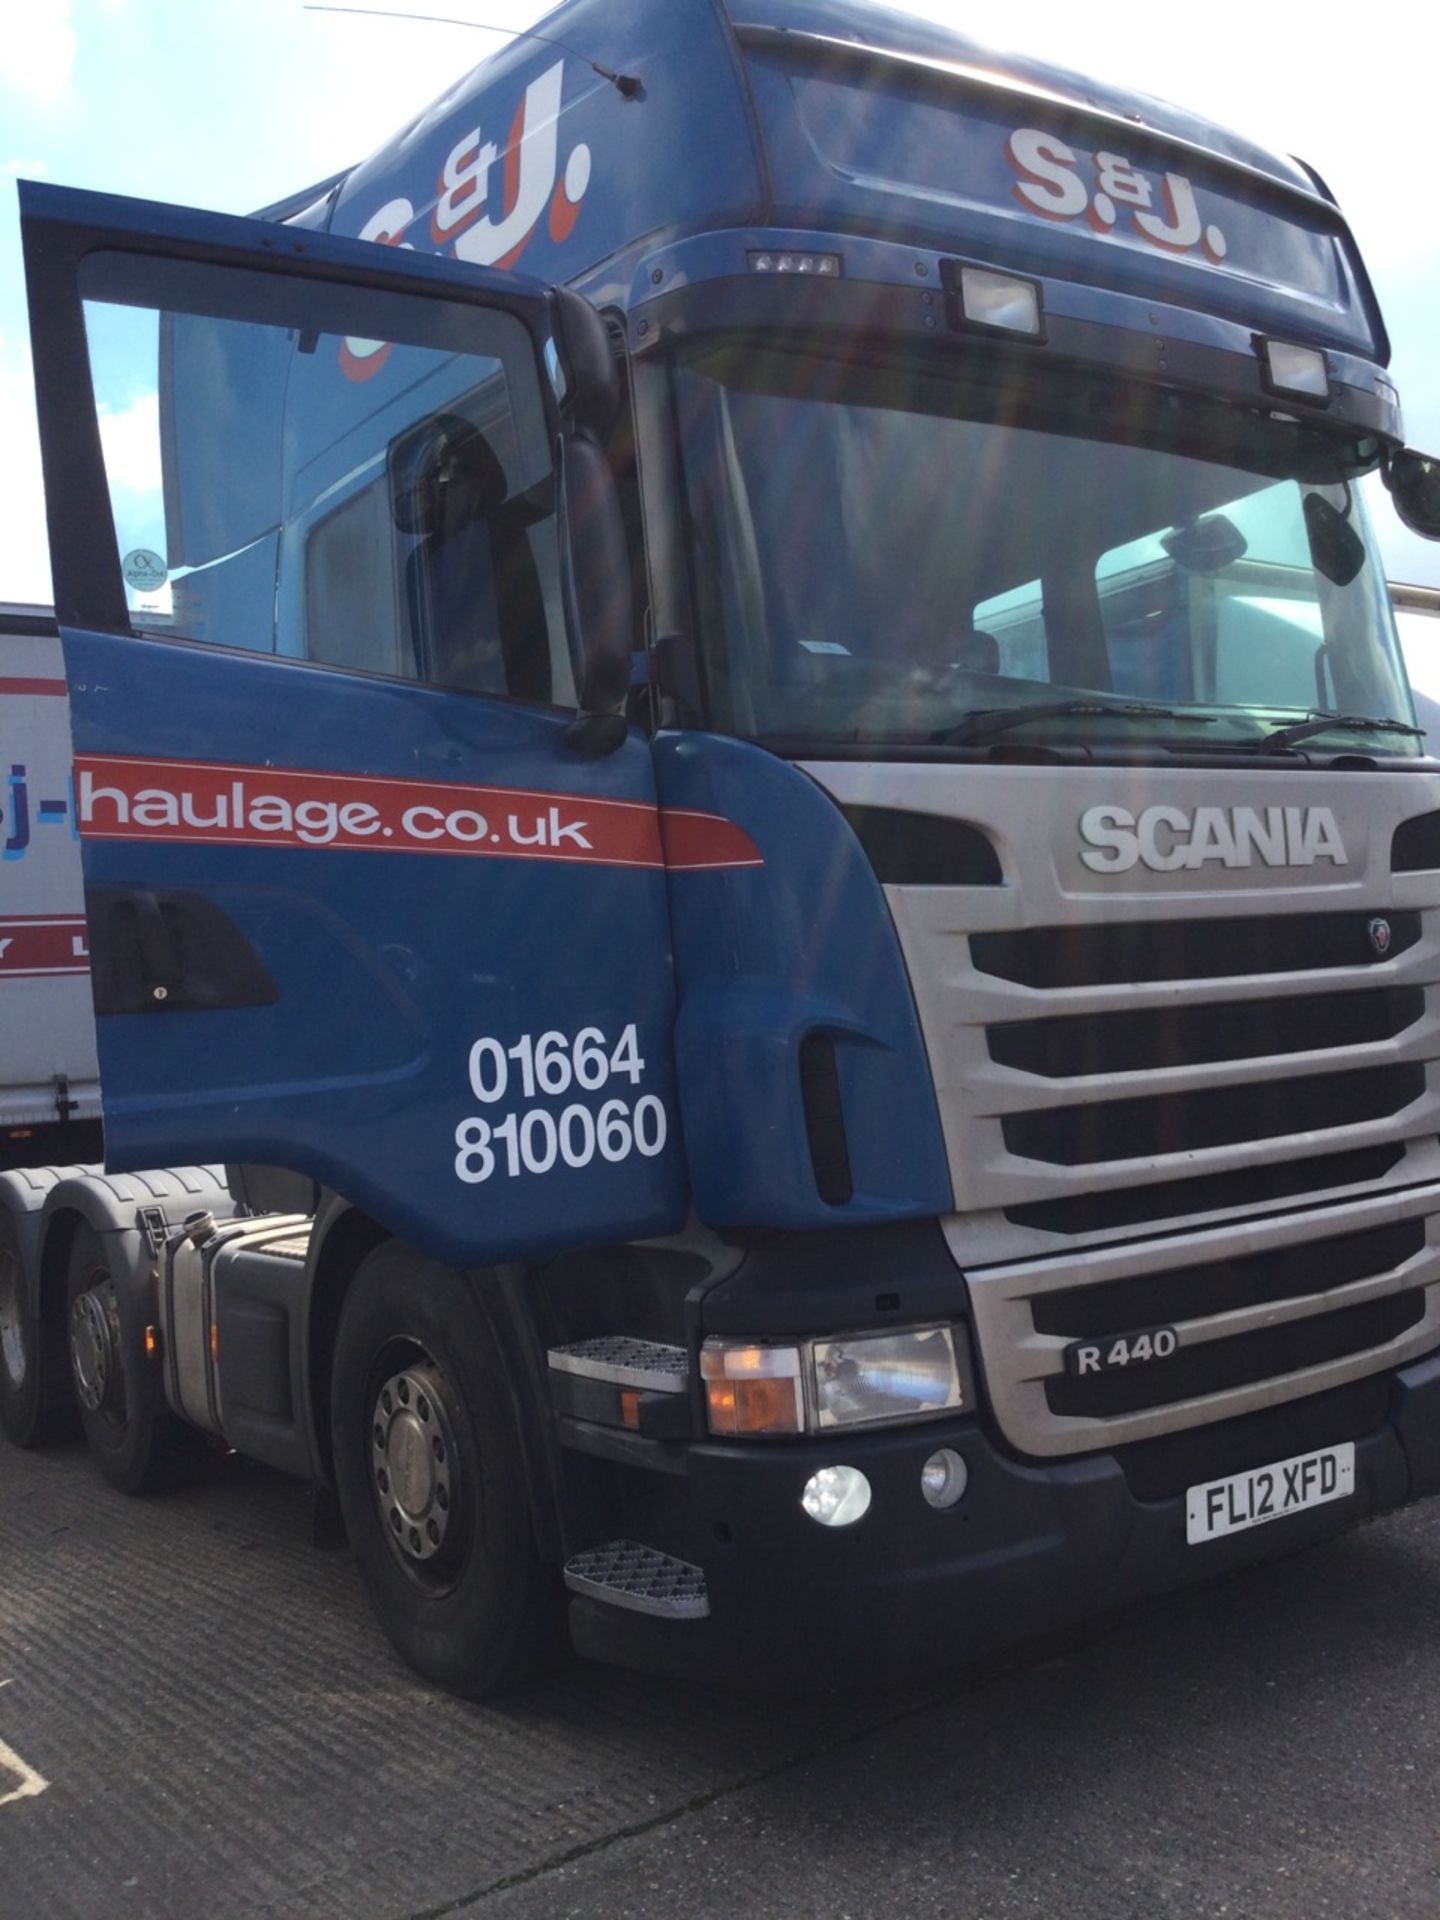 Scania R440-SRS L-CLASS 6x2 Tractor Unit With Mid-Lift Rear Axle, Sleeper Until 31/05/241141217kms, - Image 2 of 4